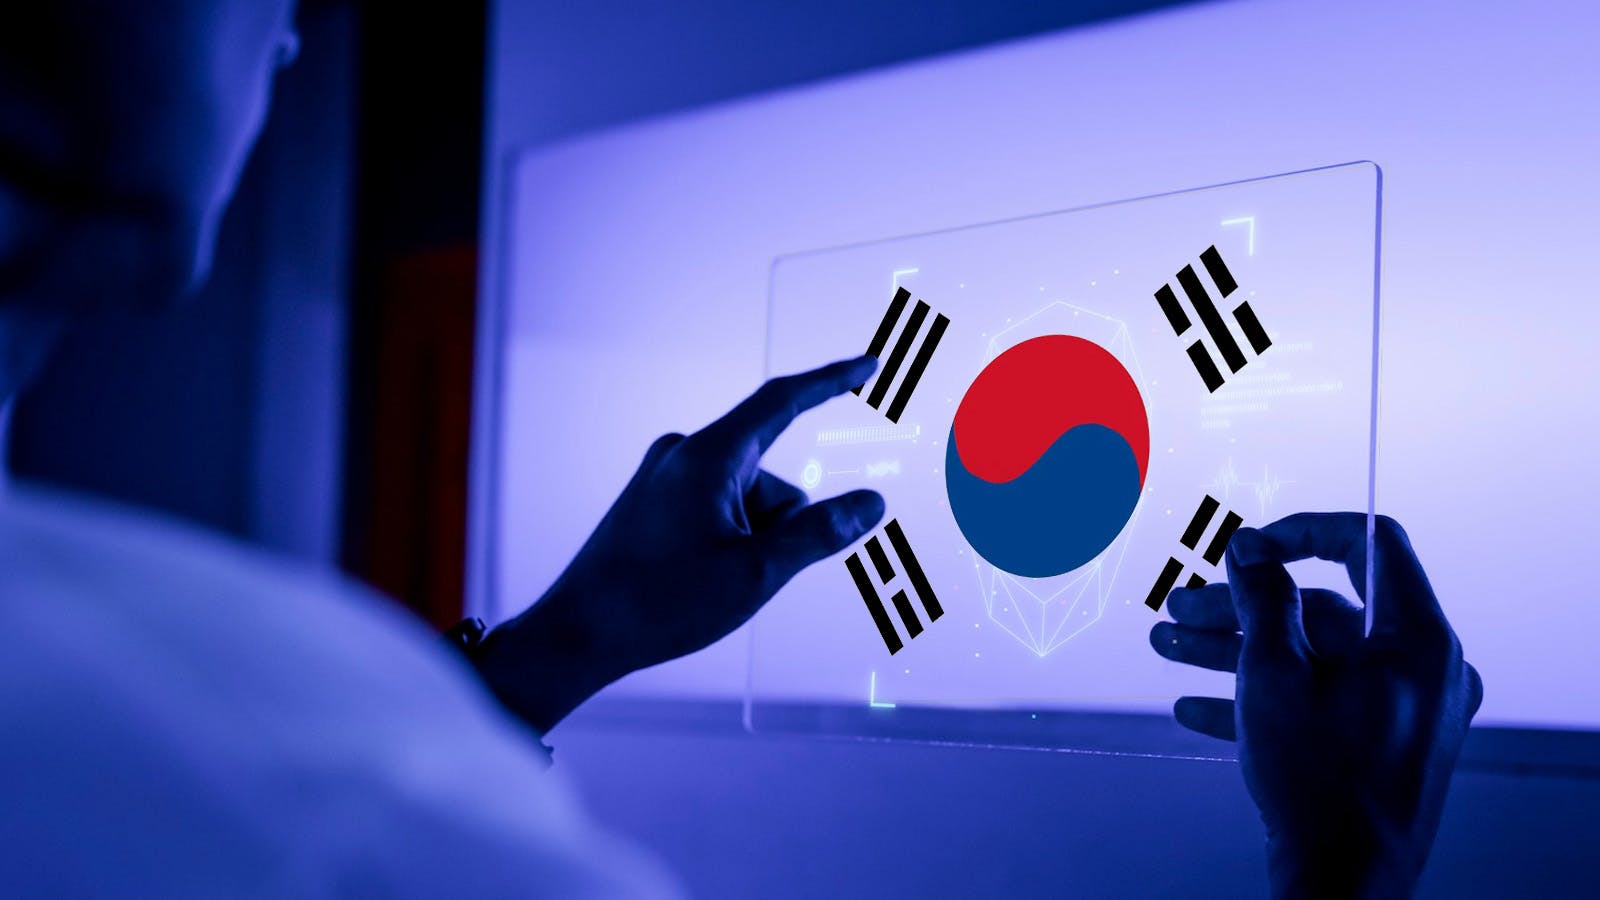 You can now claim Citizens’ Rights through NFT in this South Korean City